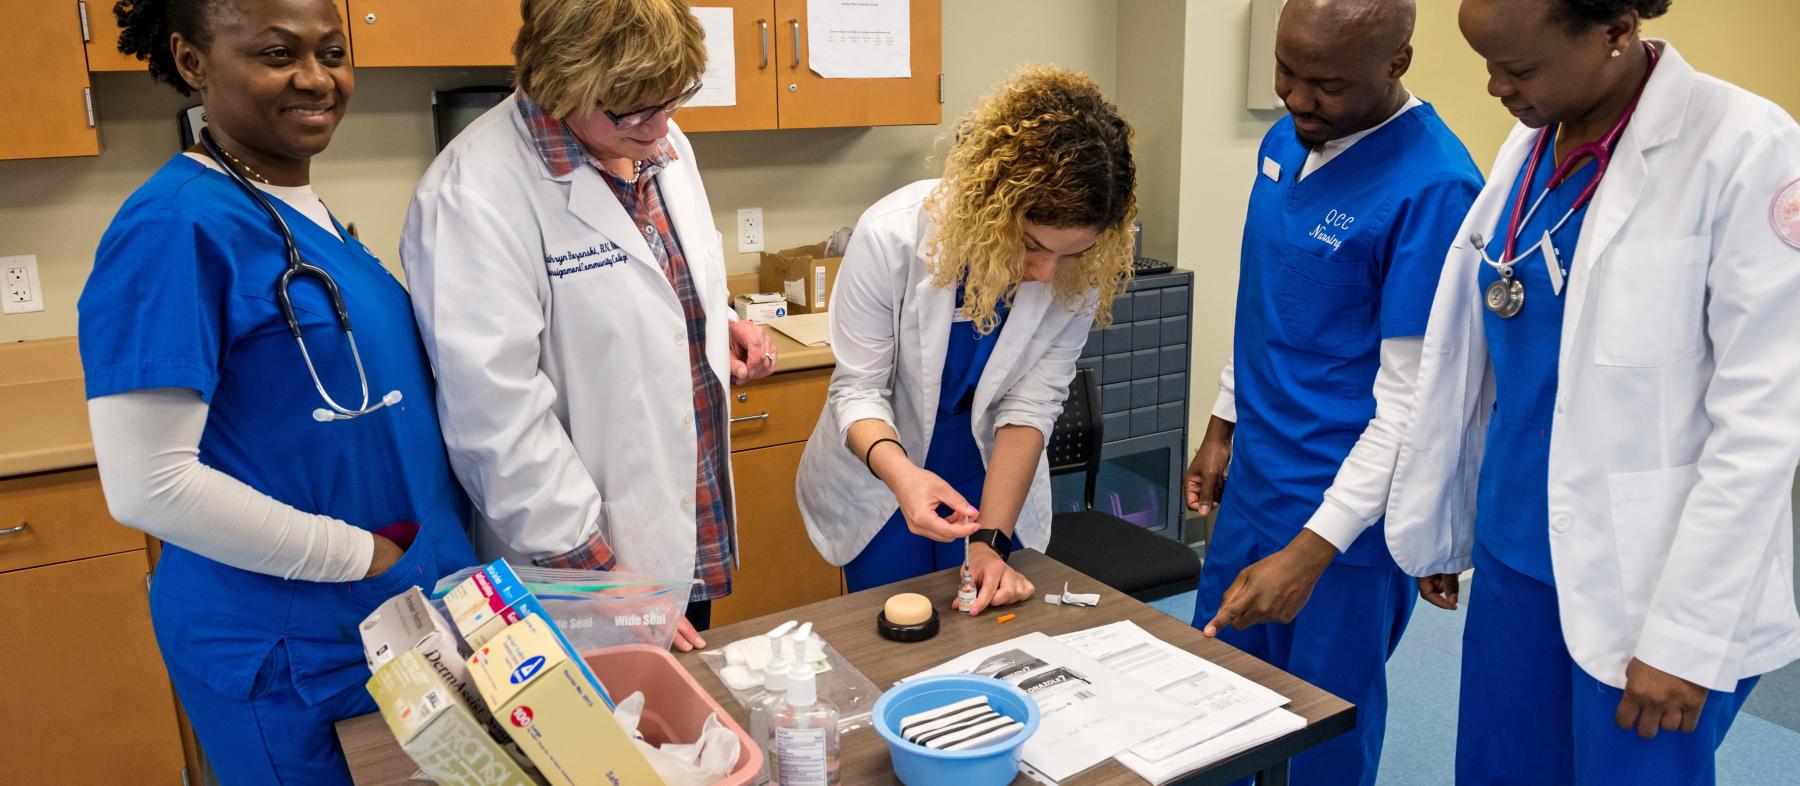 Nursing students gather to learn about medical instruments